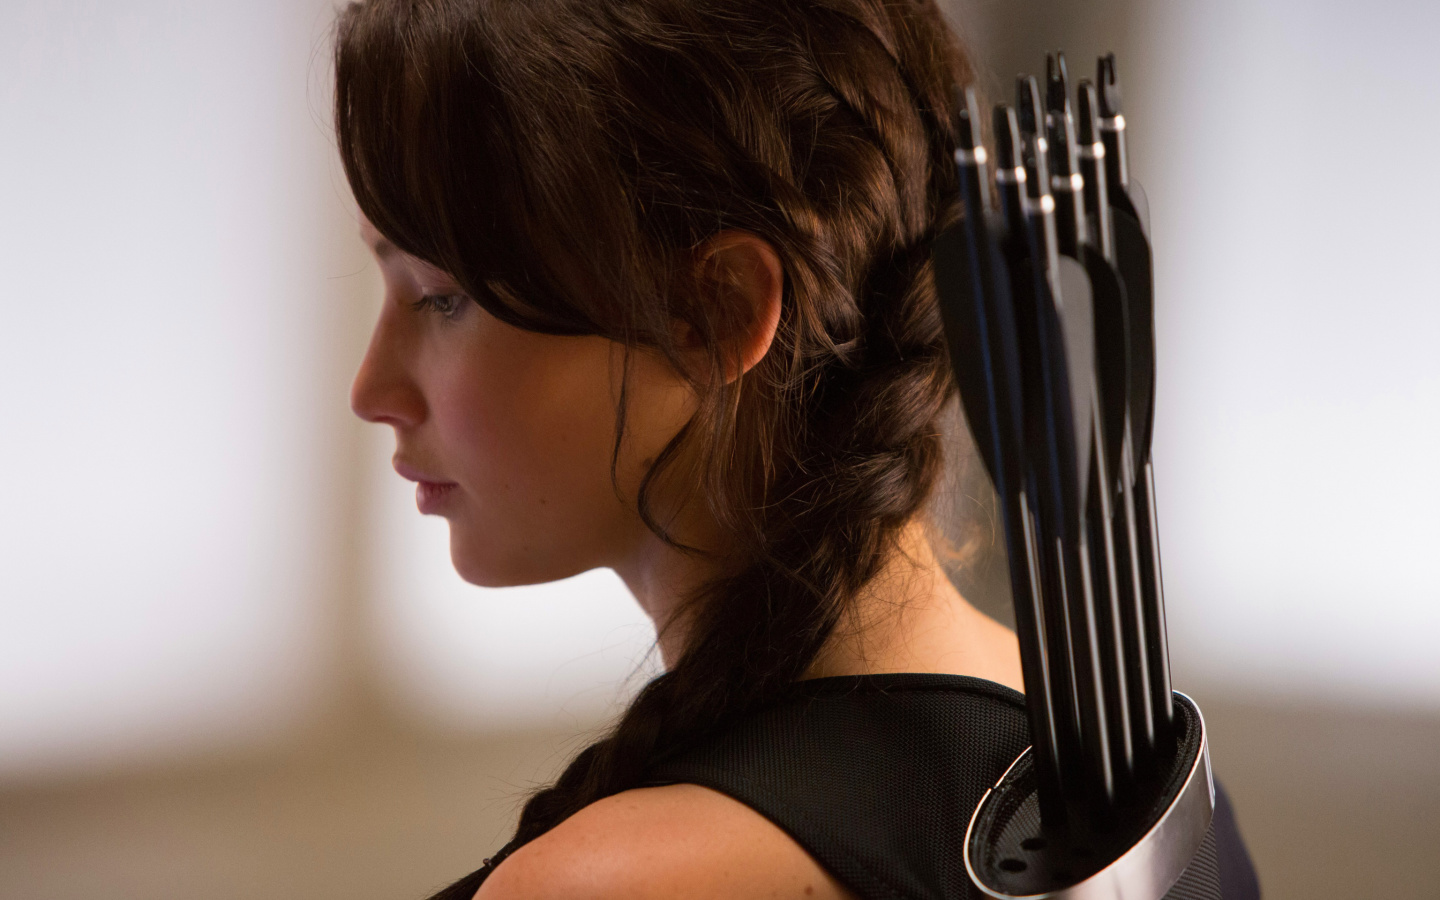 Jennifer lawrence in The Hunger Games Catching Fire wallpaper 1440x900